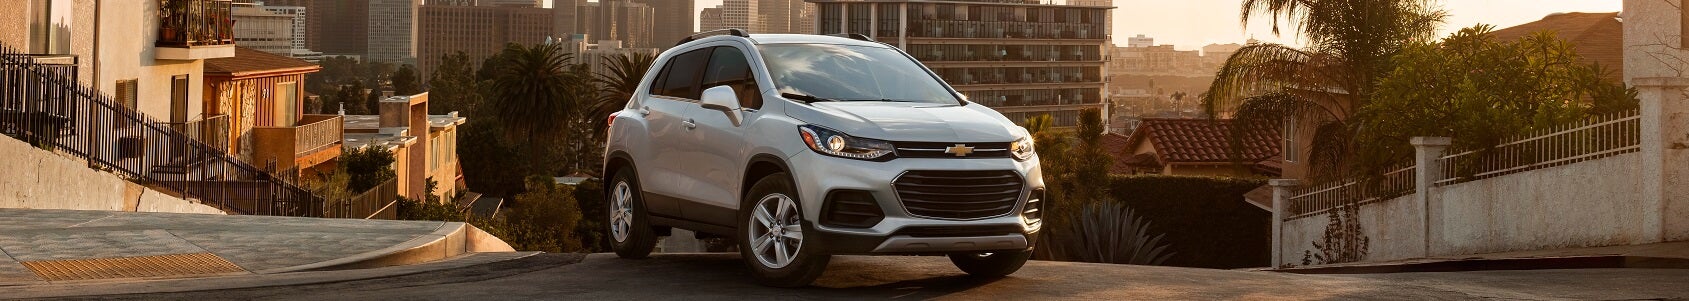 2021 Chevy Trax Review